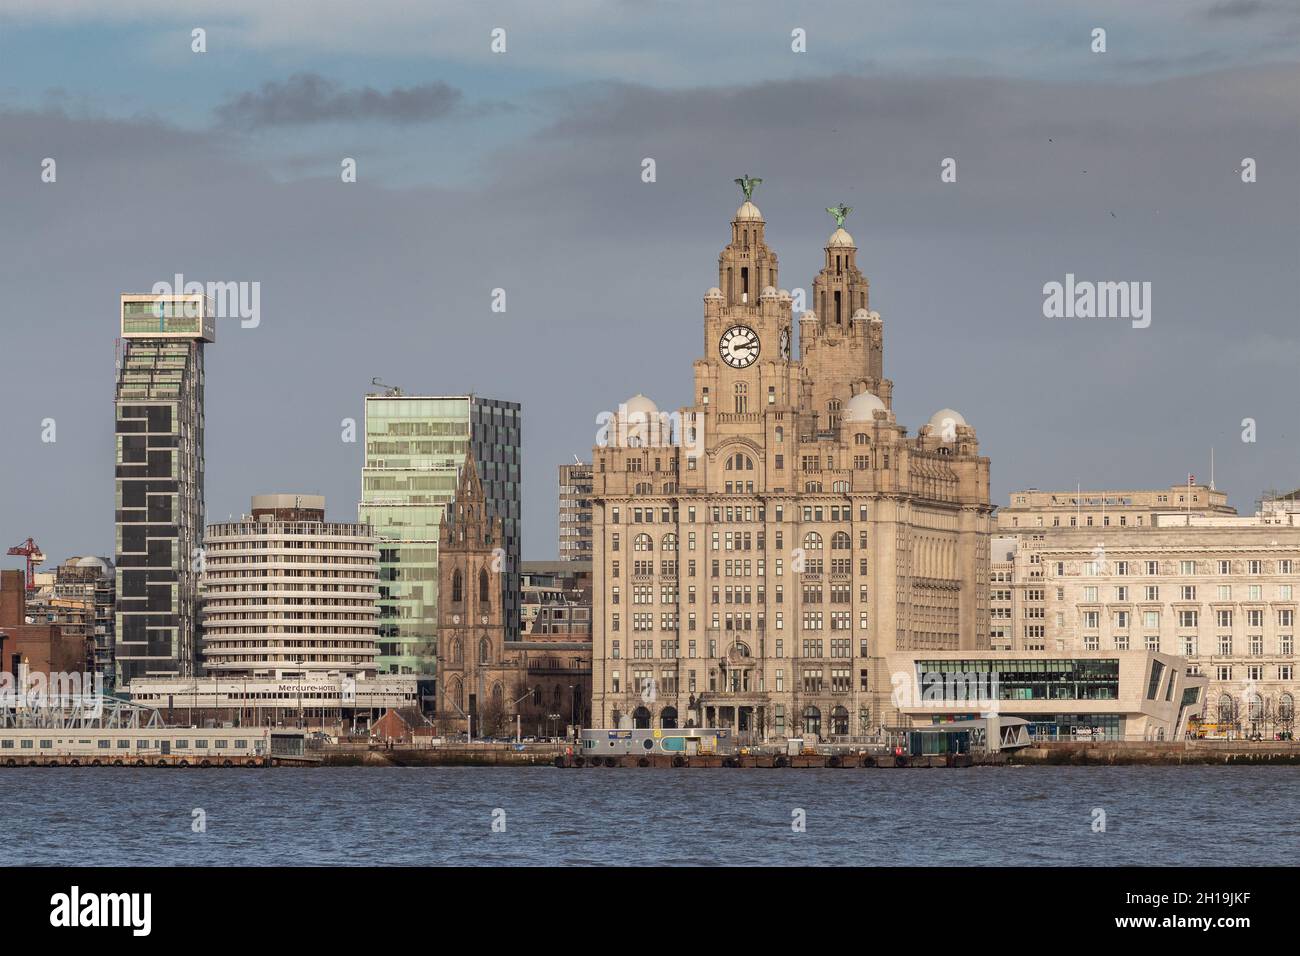 Liverpool, UK: Royal Liver building on the city's historic waterfront, overlooking the River Mersey. Stock Photo